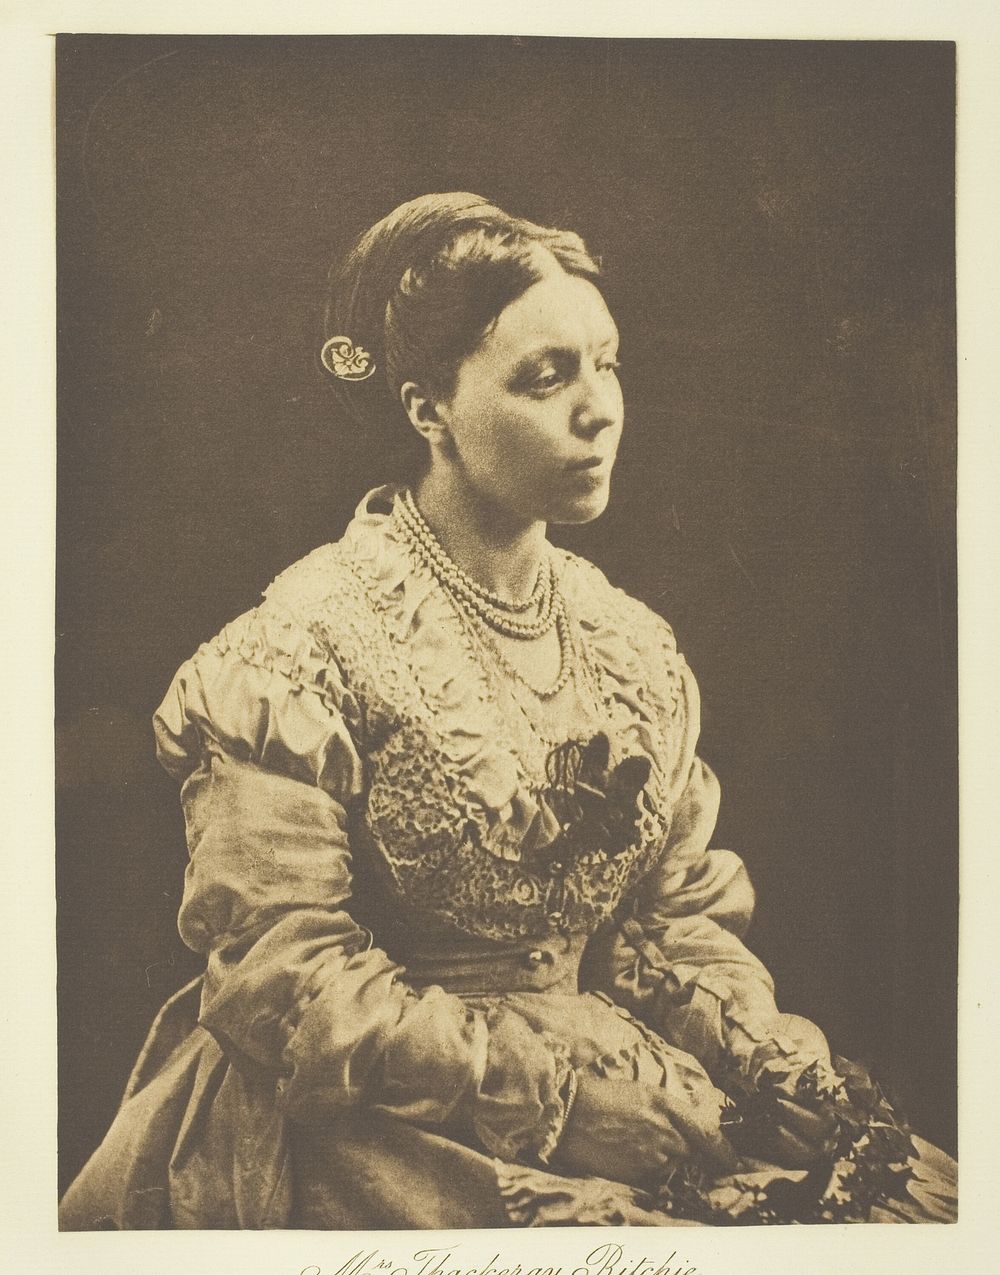 Mrs. Thackeray Ritchie by Julia Margaret Cameron